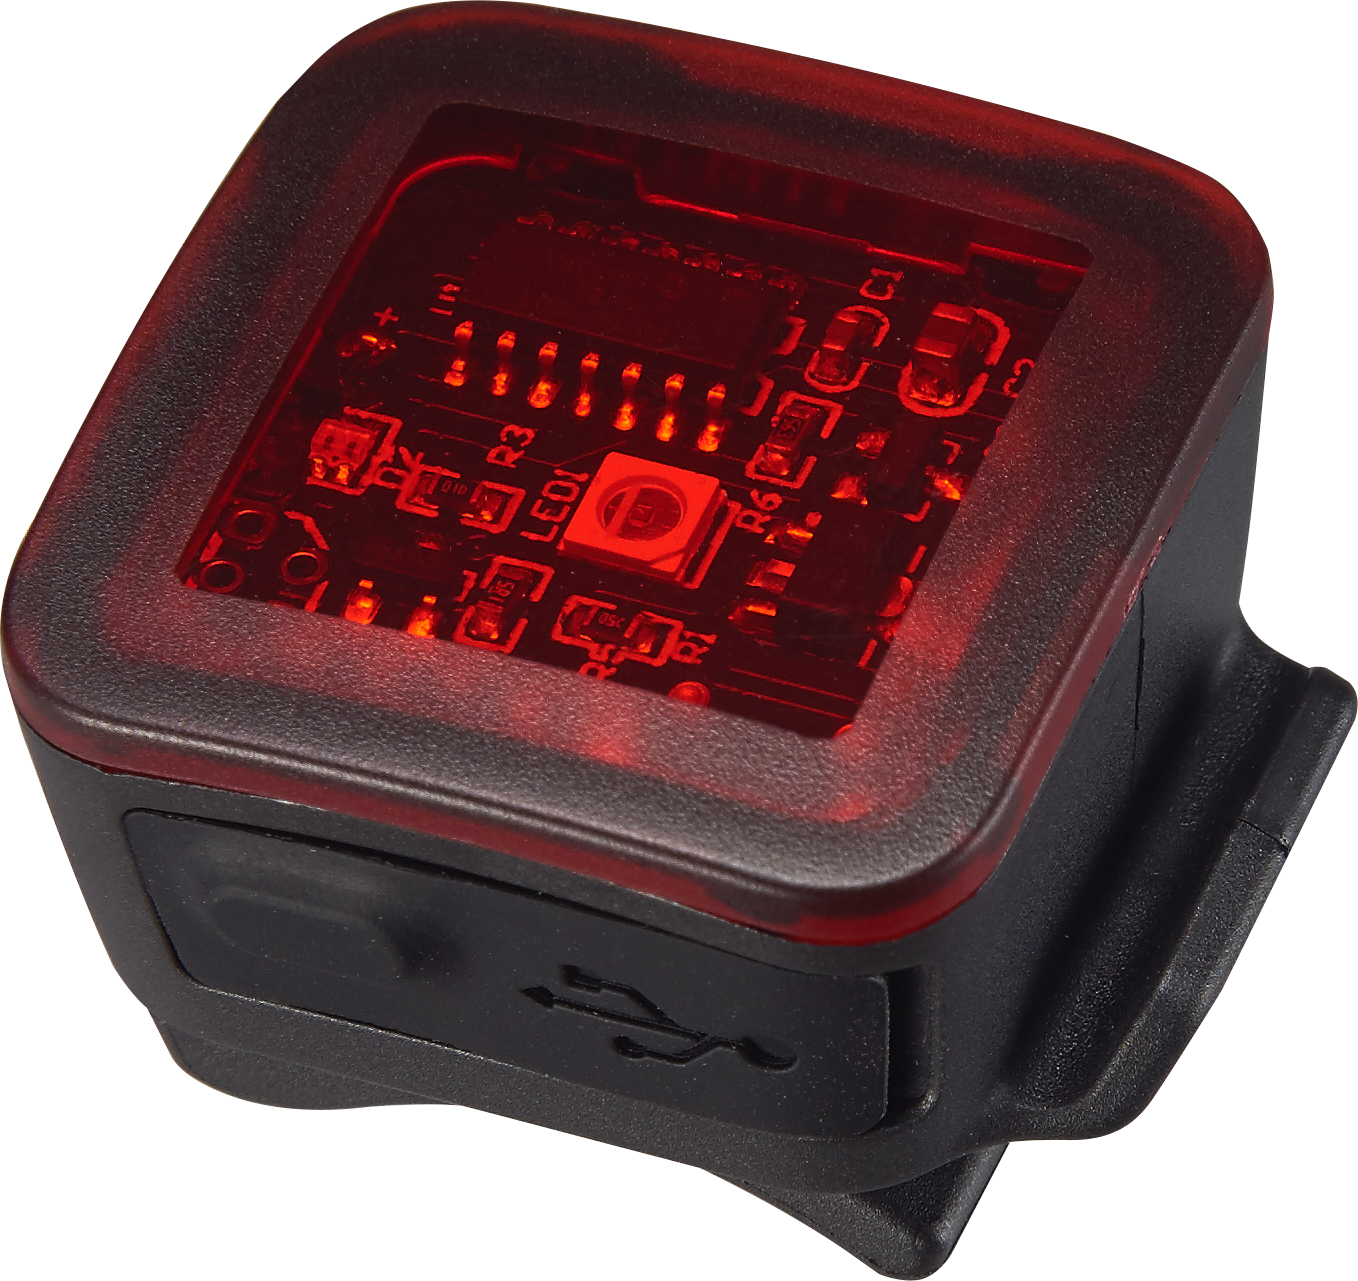 Cycles UK Specialized  Flashback Taillight Rear Cycling Light  Black